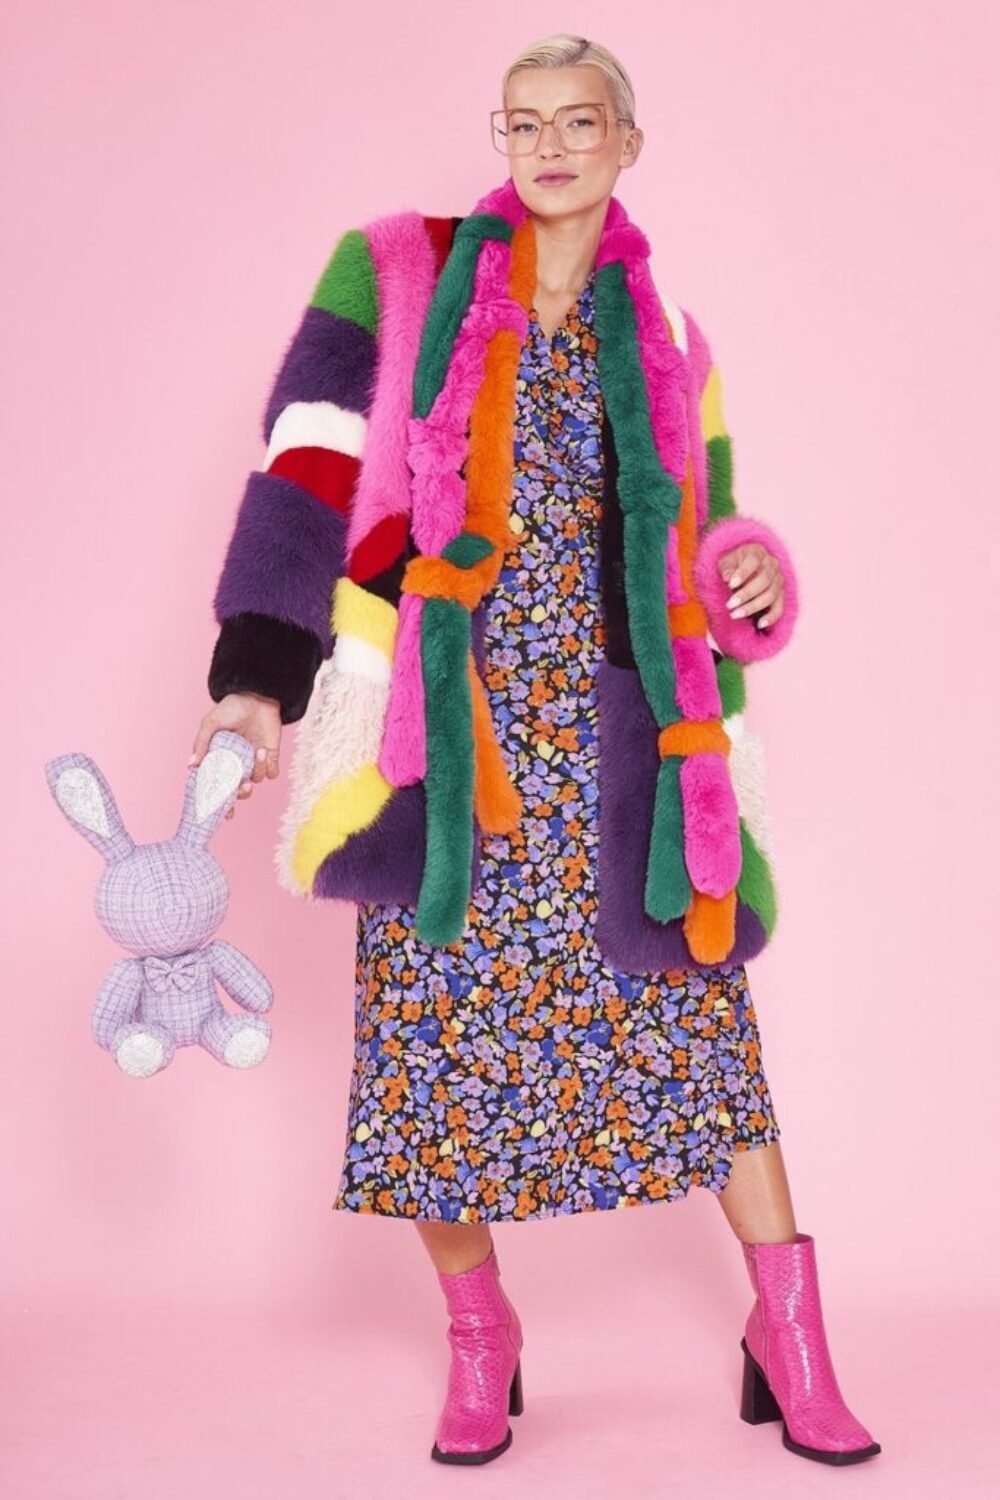 Shop Lux Faux Fur Rainbow Coat and women's luxury and designer clothes at www.lux-apparel.co.uk